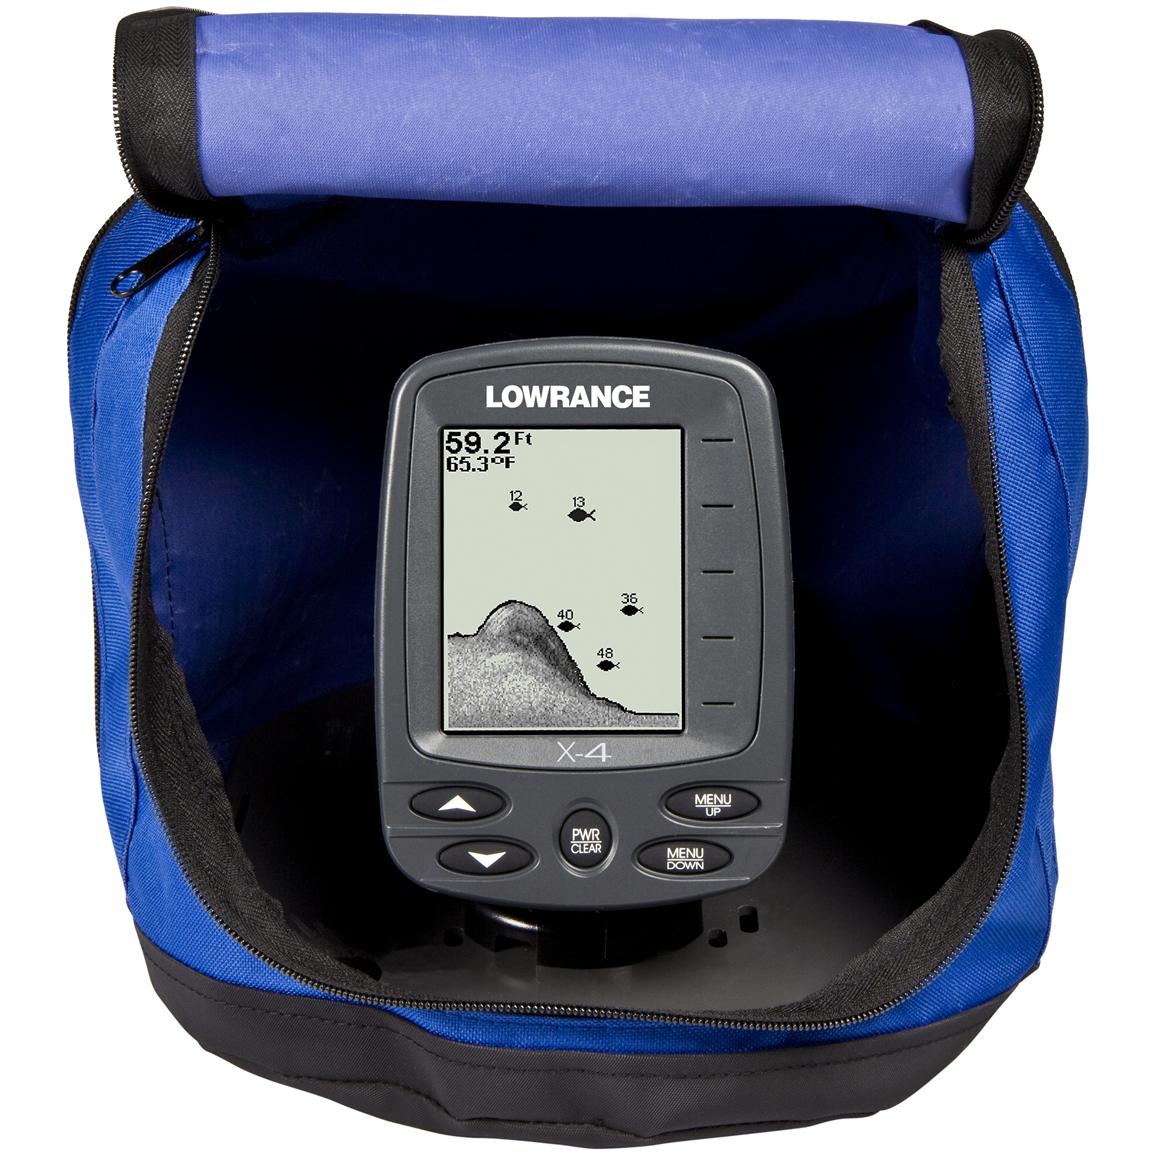 lowrance-x-4-portable-200khz-fishfinder-200805-at-sportsman-s-guide